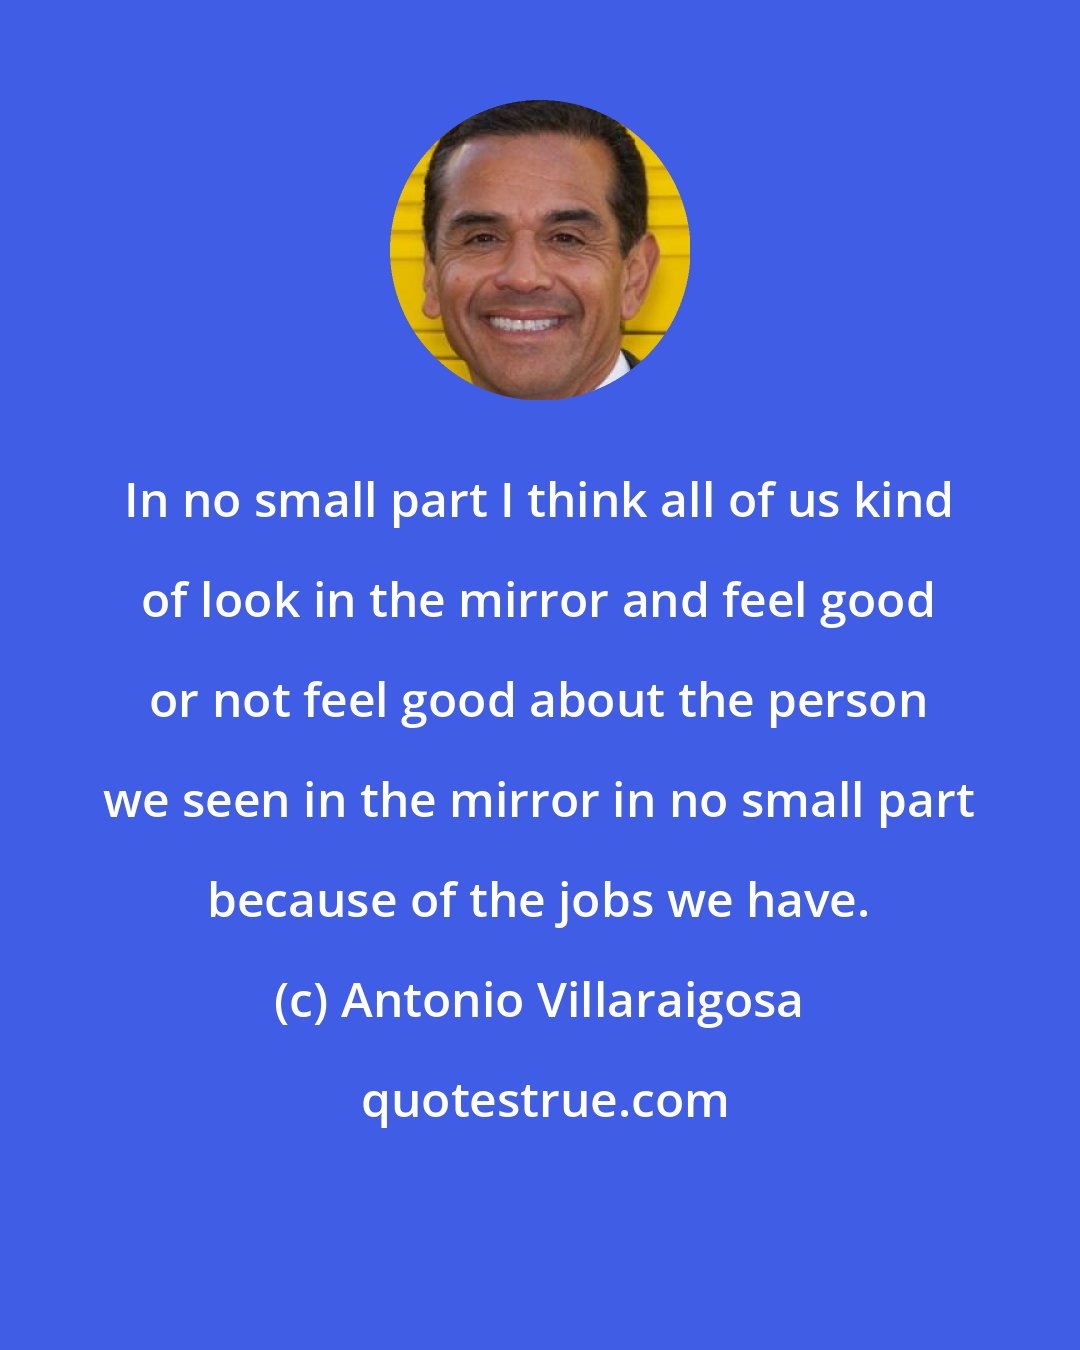 Antonio Villaraigosa: In no small part I think all of us kind of look in the mirror and feel good or not feel good about the person we seen in the mirror in no small part because of the jobs we have.